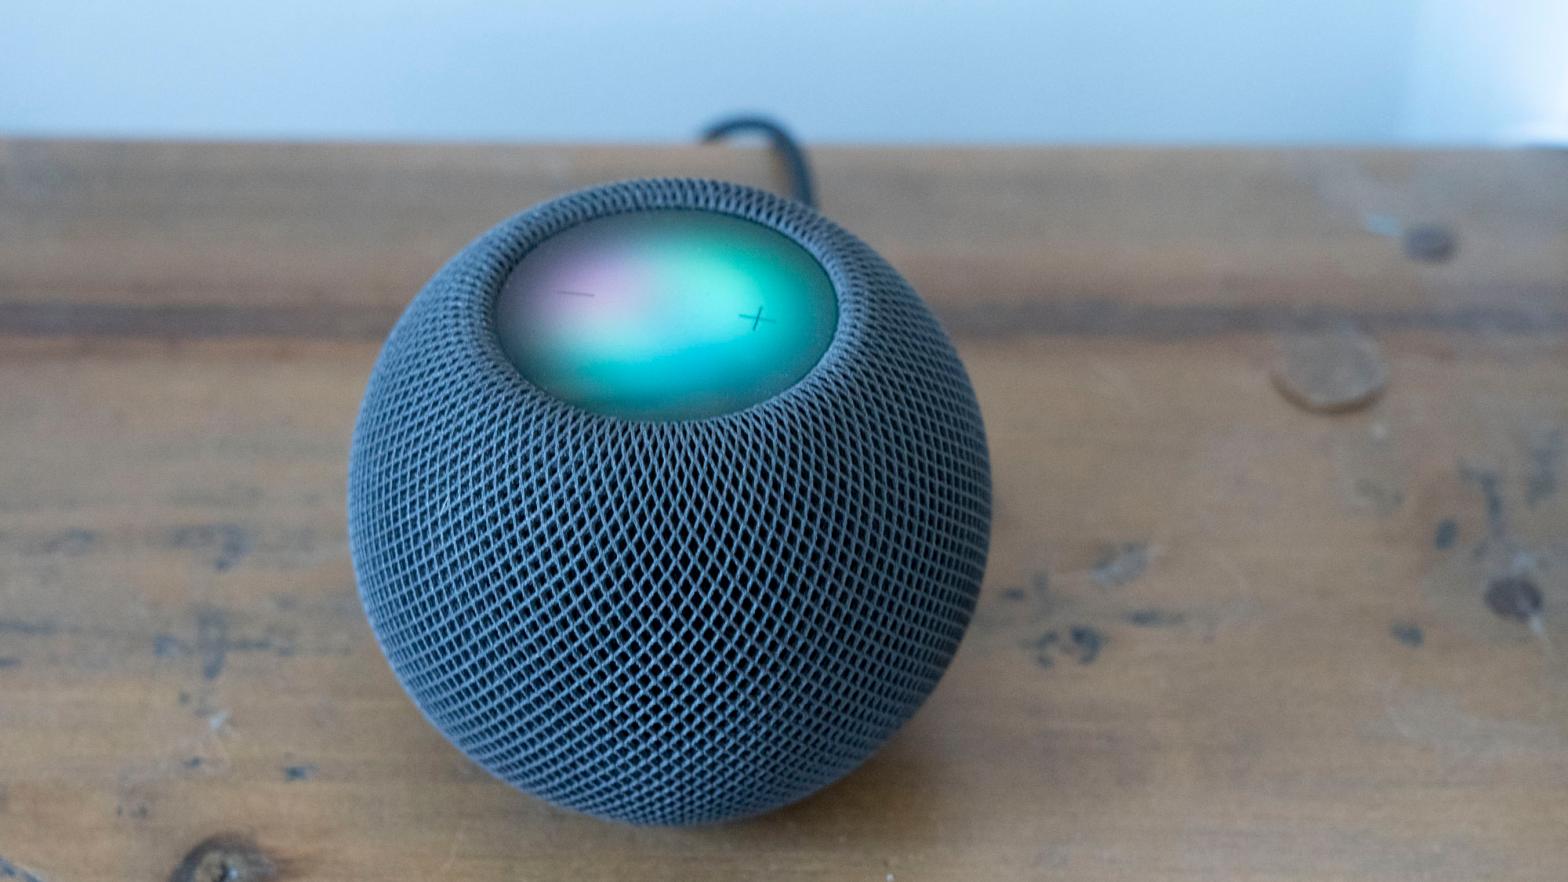 Apple's HomePod Mini has Siri baked in to help you control your smart home. (Photo: Alex Cranz/Gizmodo)